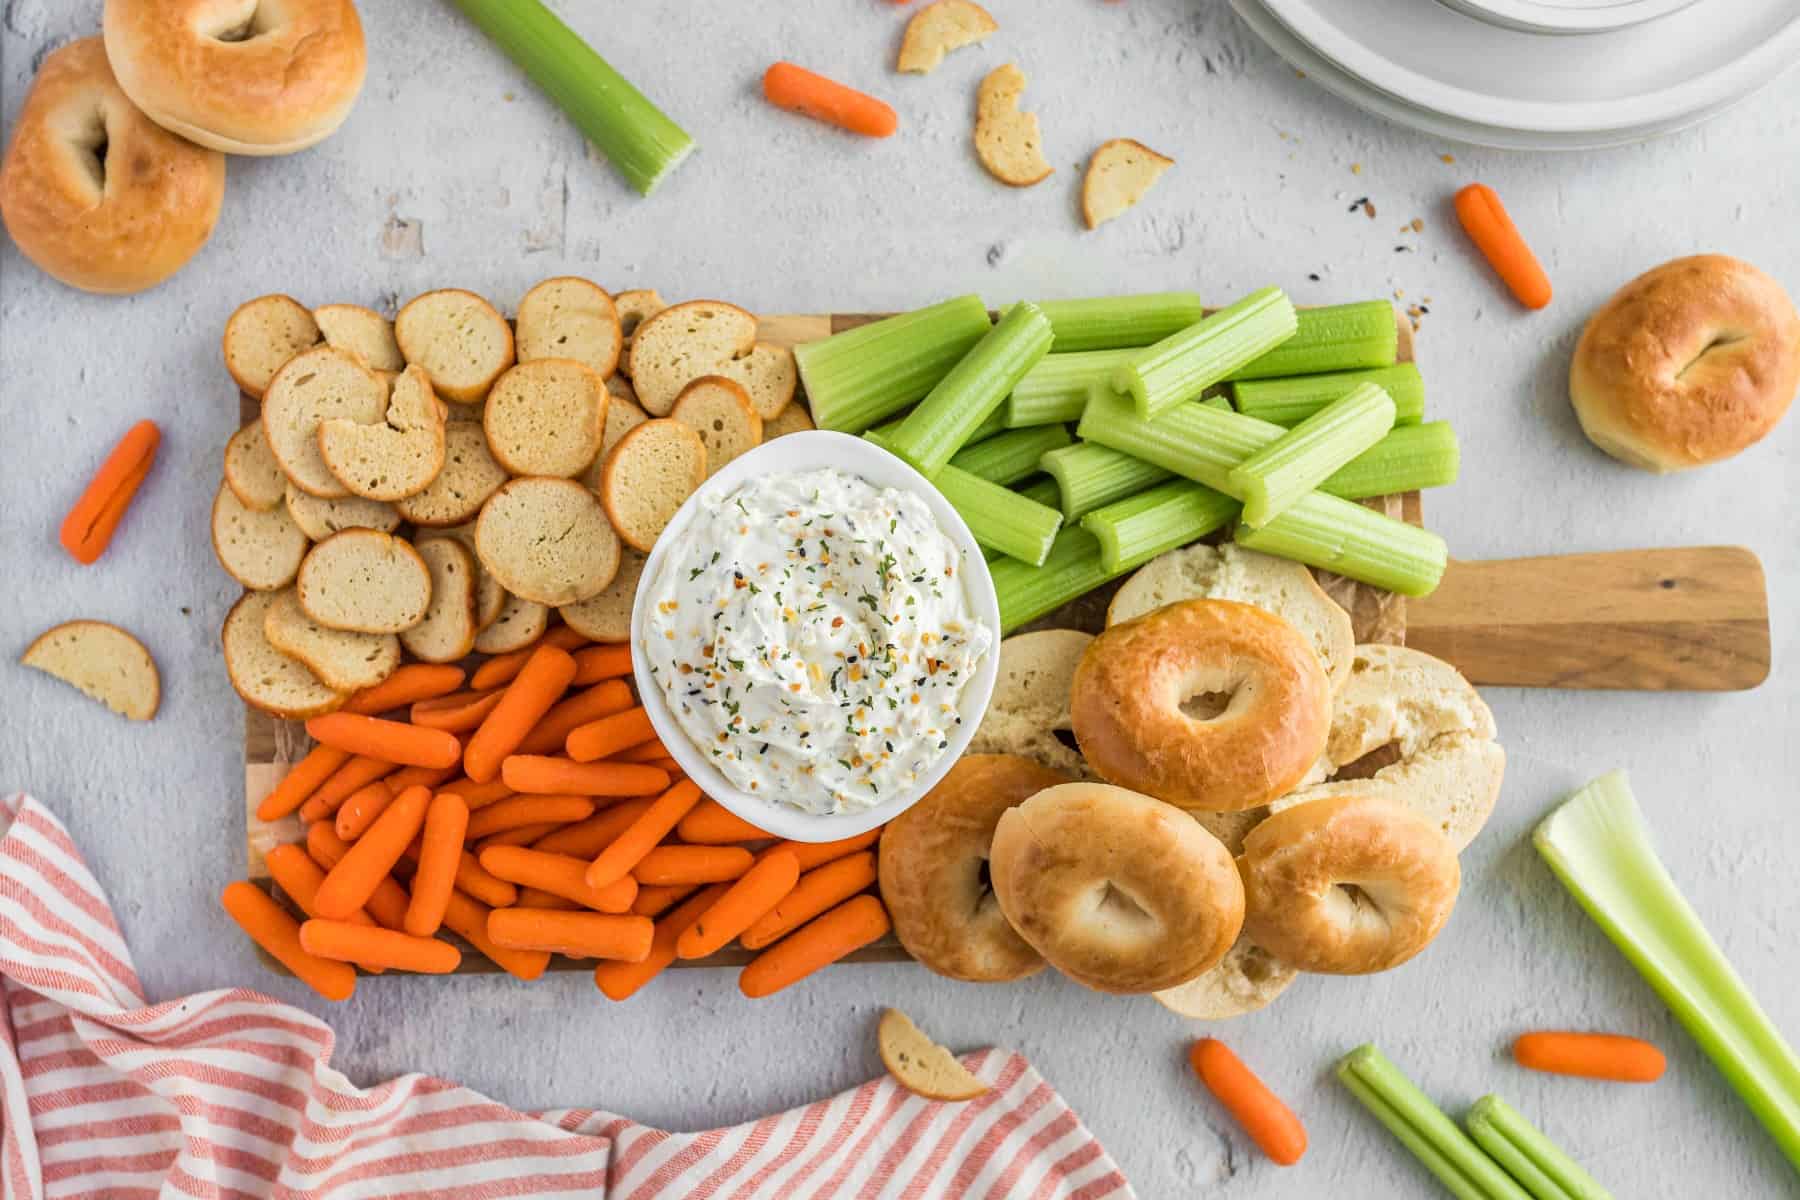 Horizontal picture of a wooden platter of carrots, bagels, crostini, celery and the dip in the middle. 